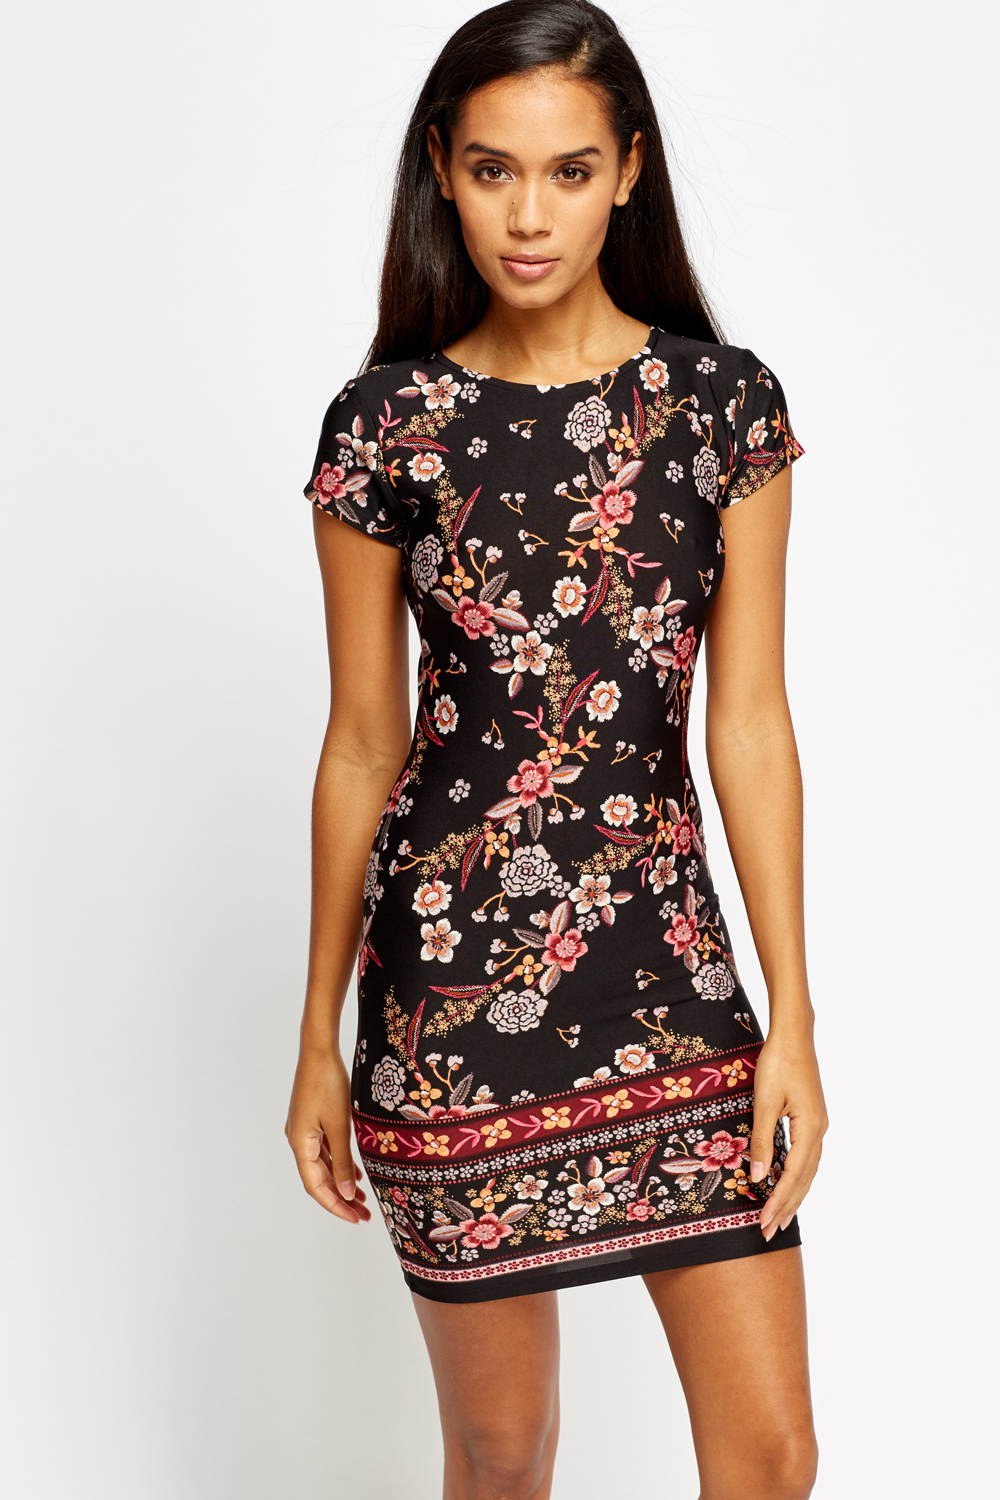 Floral Print Bodycon Dress Just 7